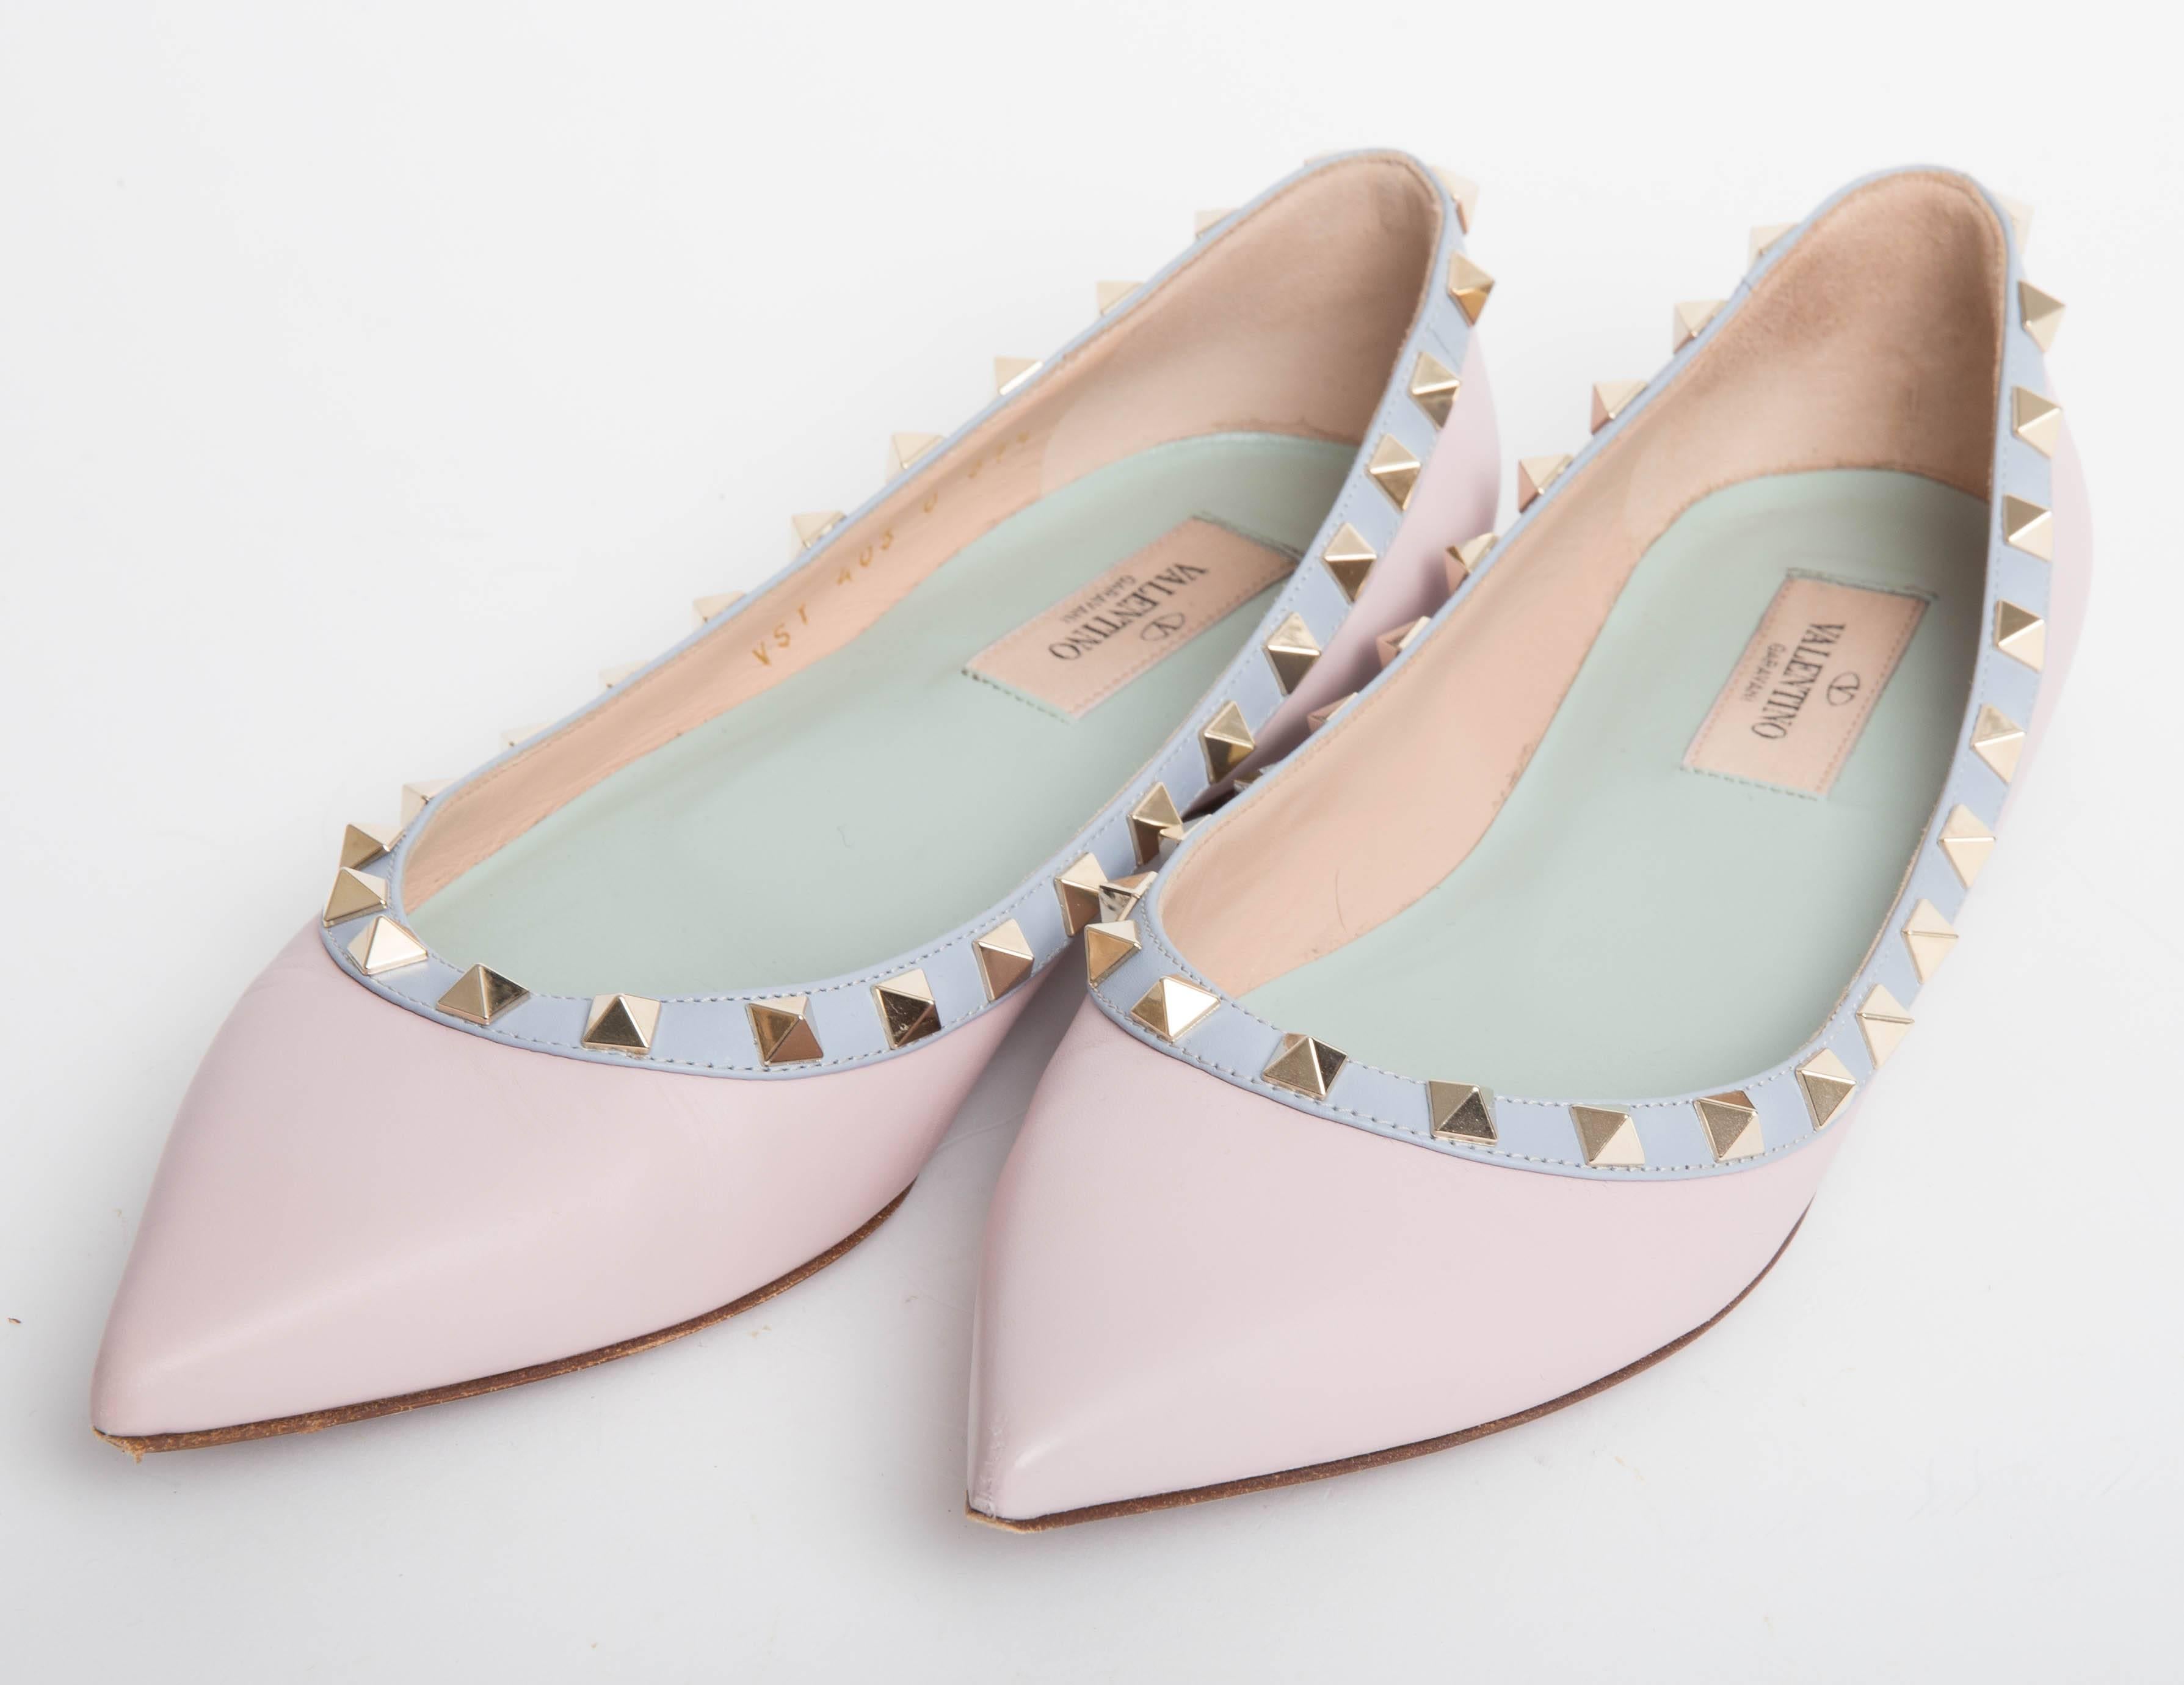 Valentino Rockstud Patent Leather Ballet Flats in Blush feature signature metal studs , with contrasting leather trim and an elegant point toe.
Patent leather upper with metal studded leather trim
Watercolor 2015.
Leather lining and sole
Padded